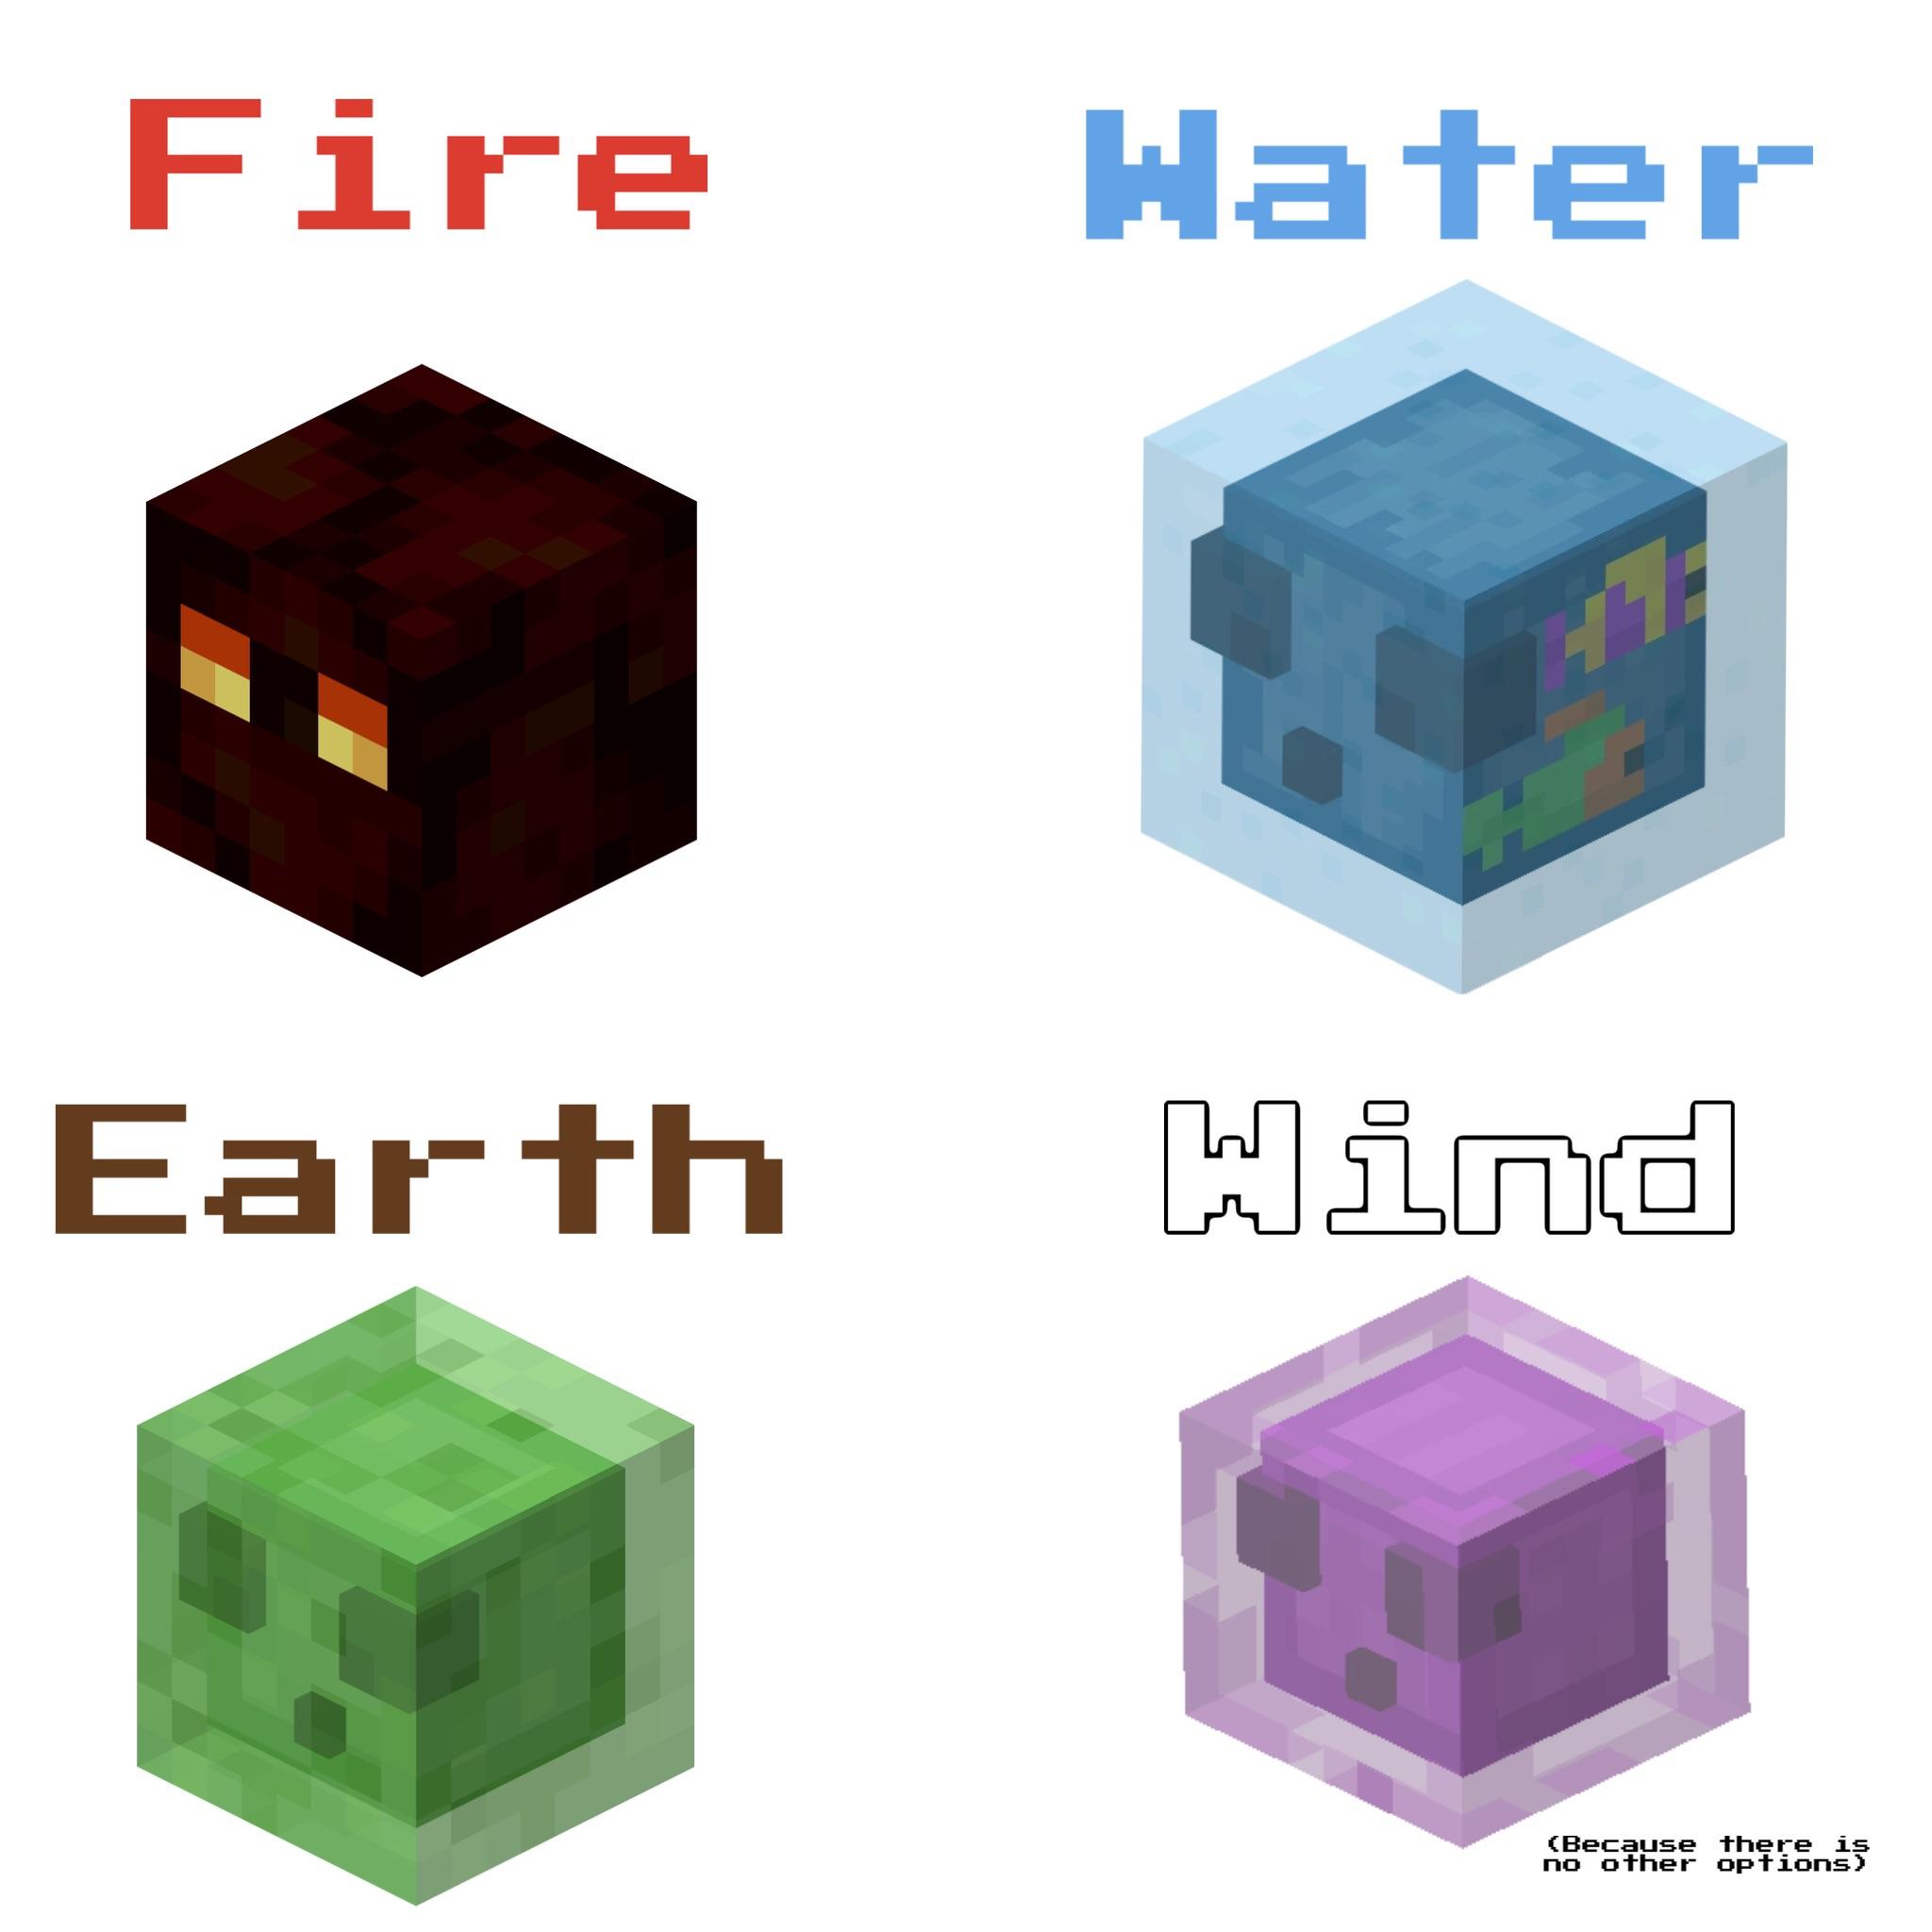 Minecraft Memes - After making the Blaze post, I’ve come to yet another realization